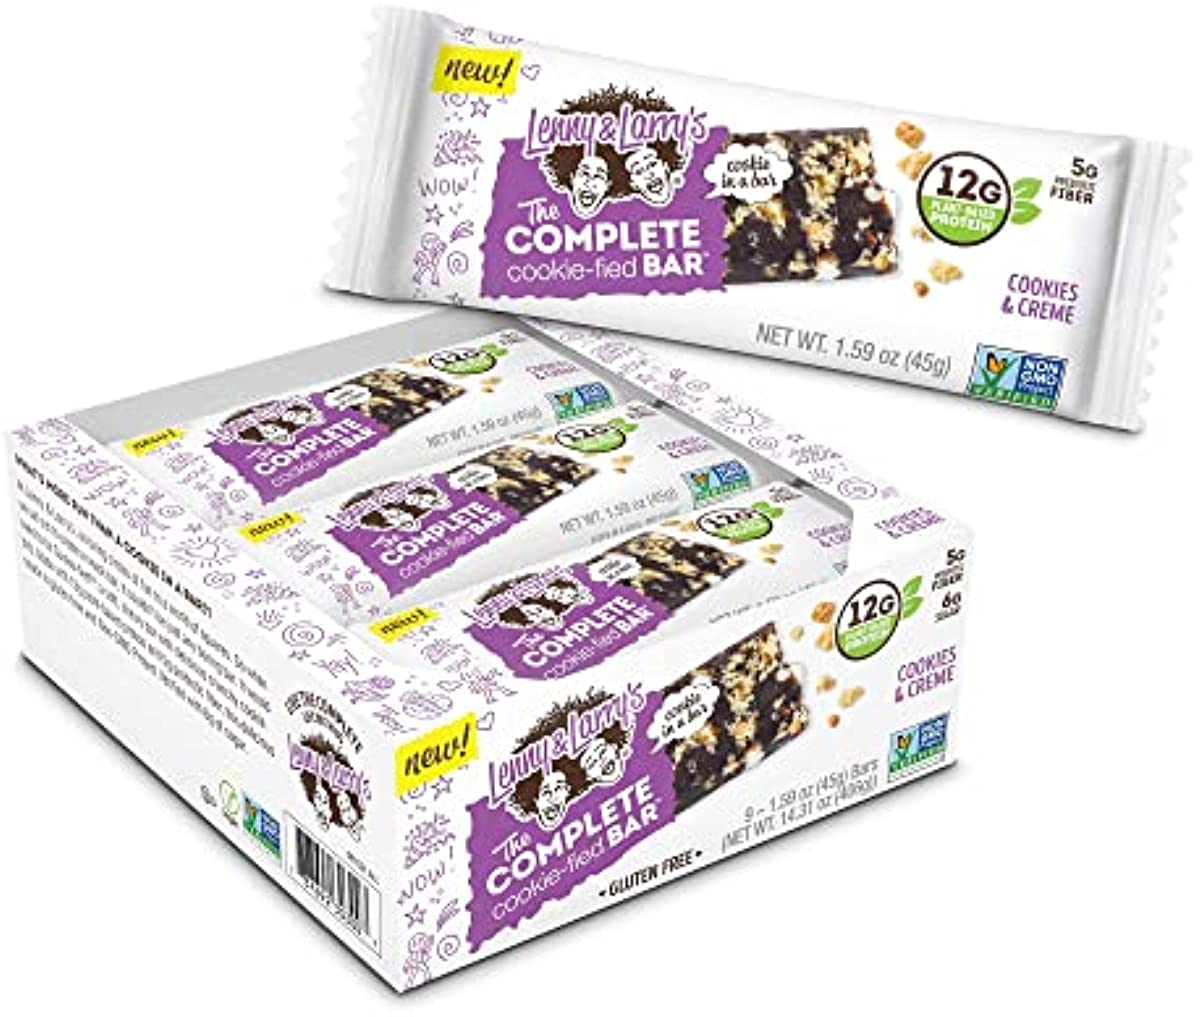 Lenny & Larry\'s The Complete Cookie-fied Bar, Cookies & Creme, 45g - Plant-Based Protein Bar, Vegan and Non-GMO (Pack of 9)